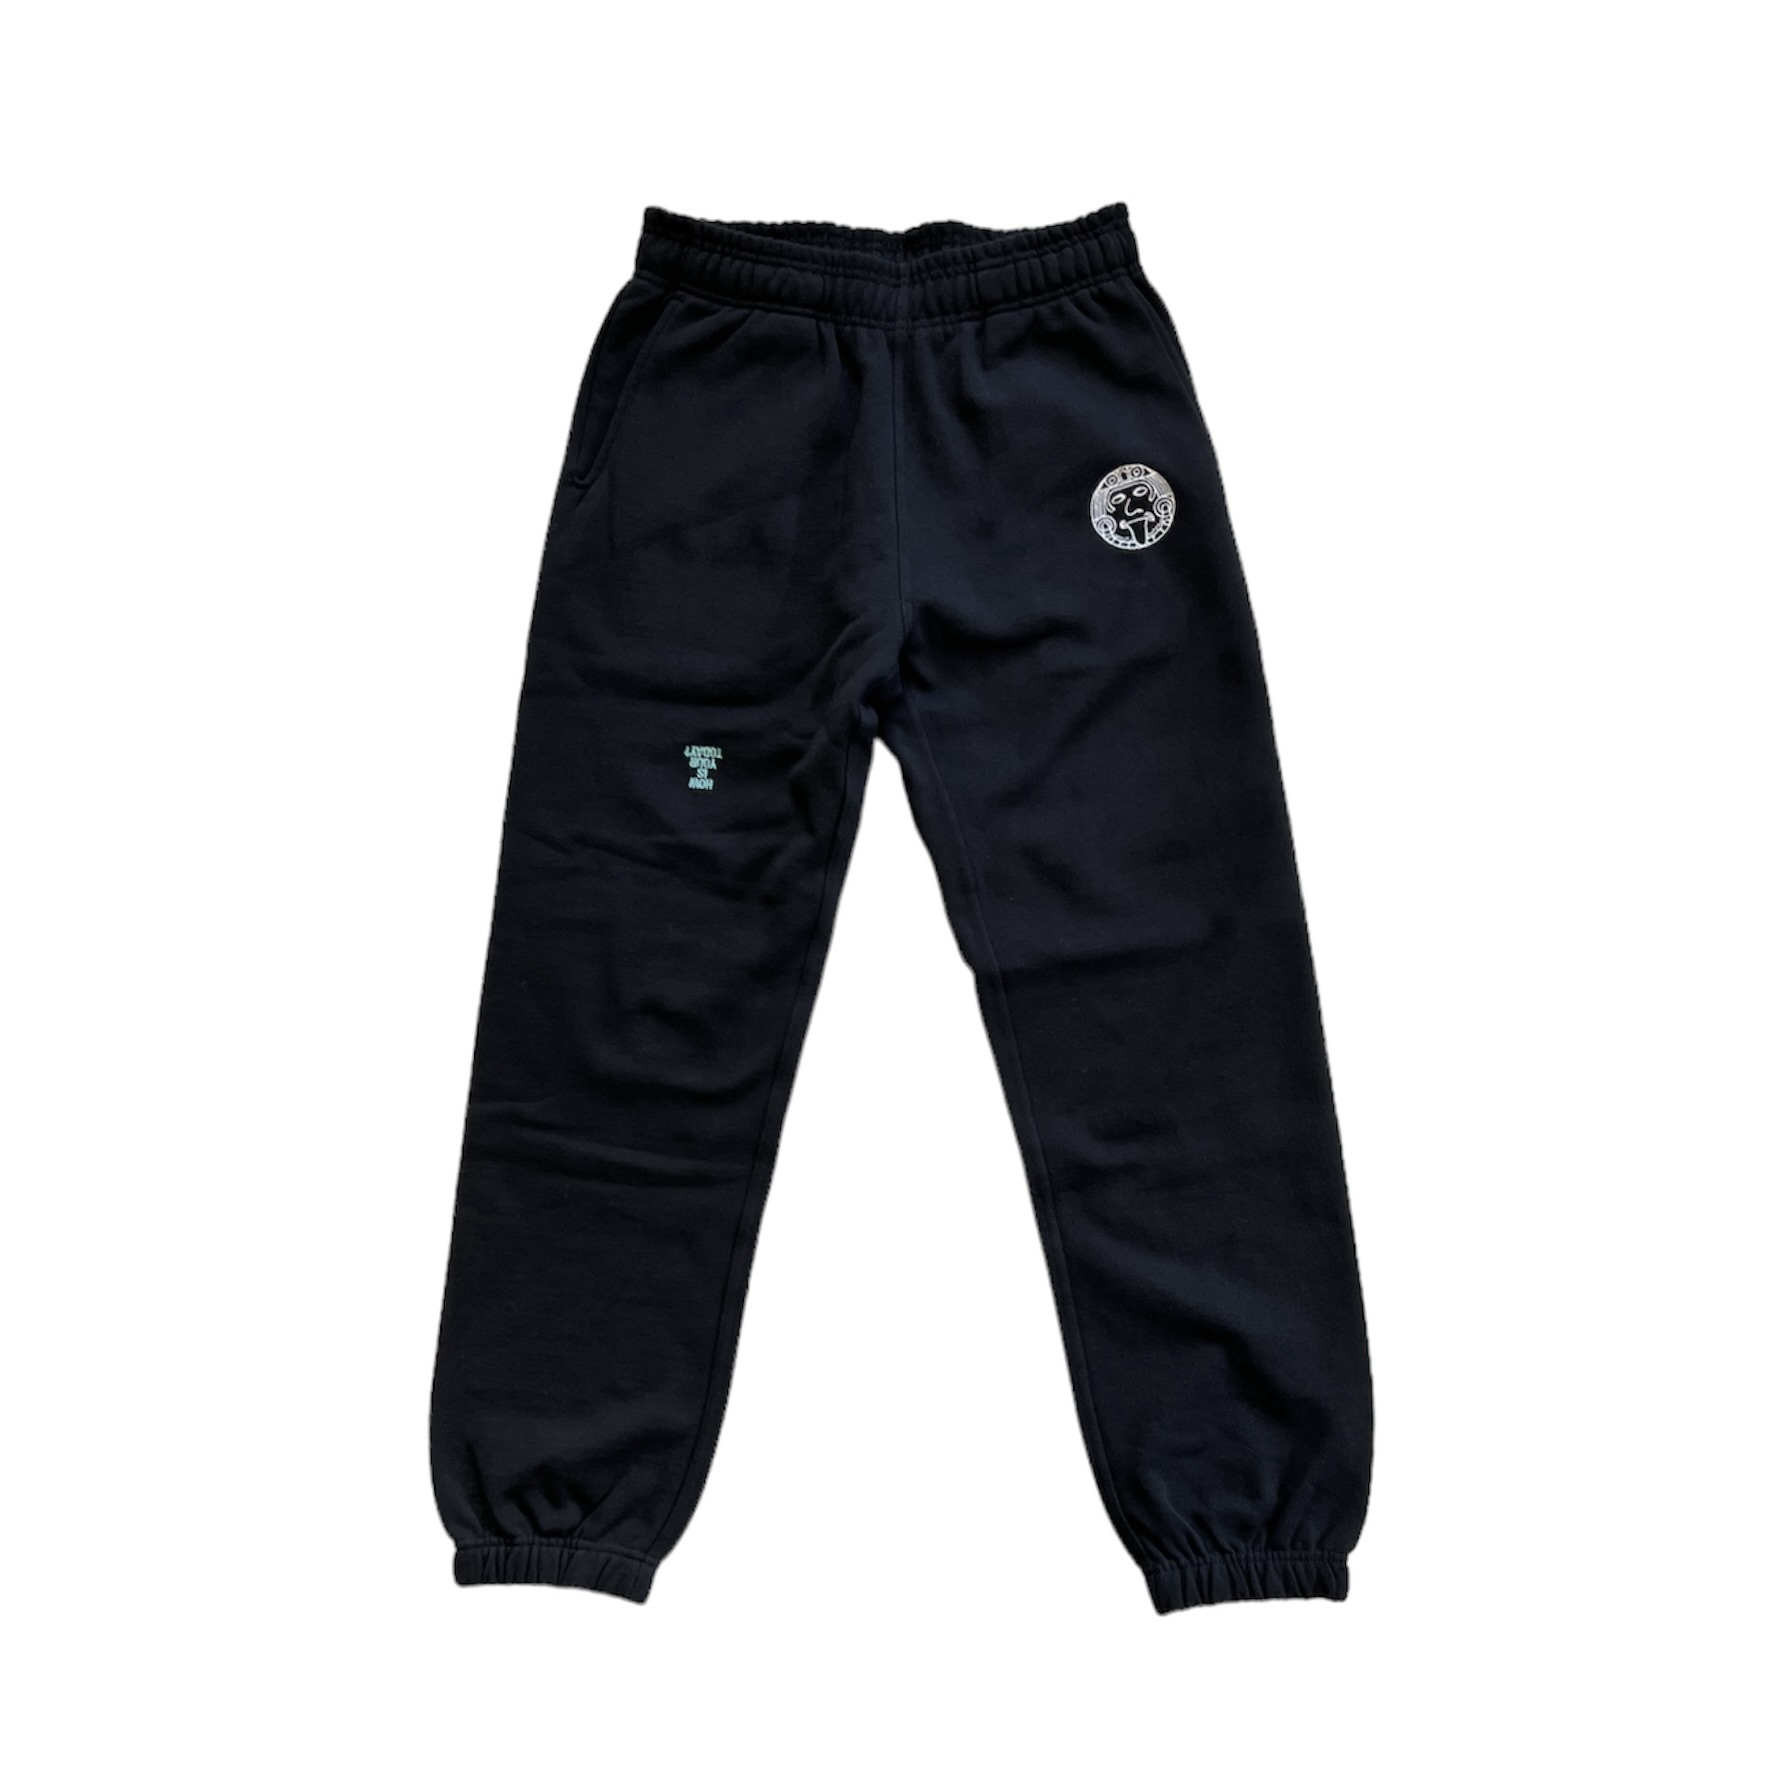 TODAY edition FLUX sweat pants